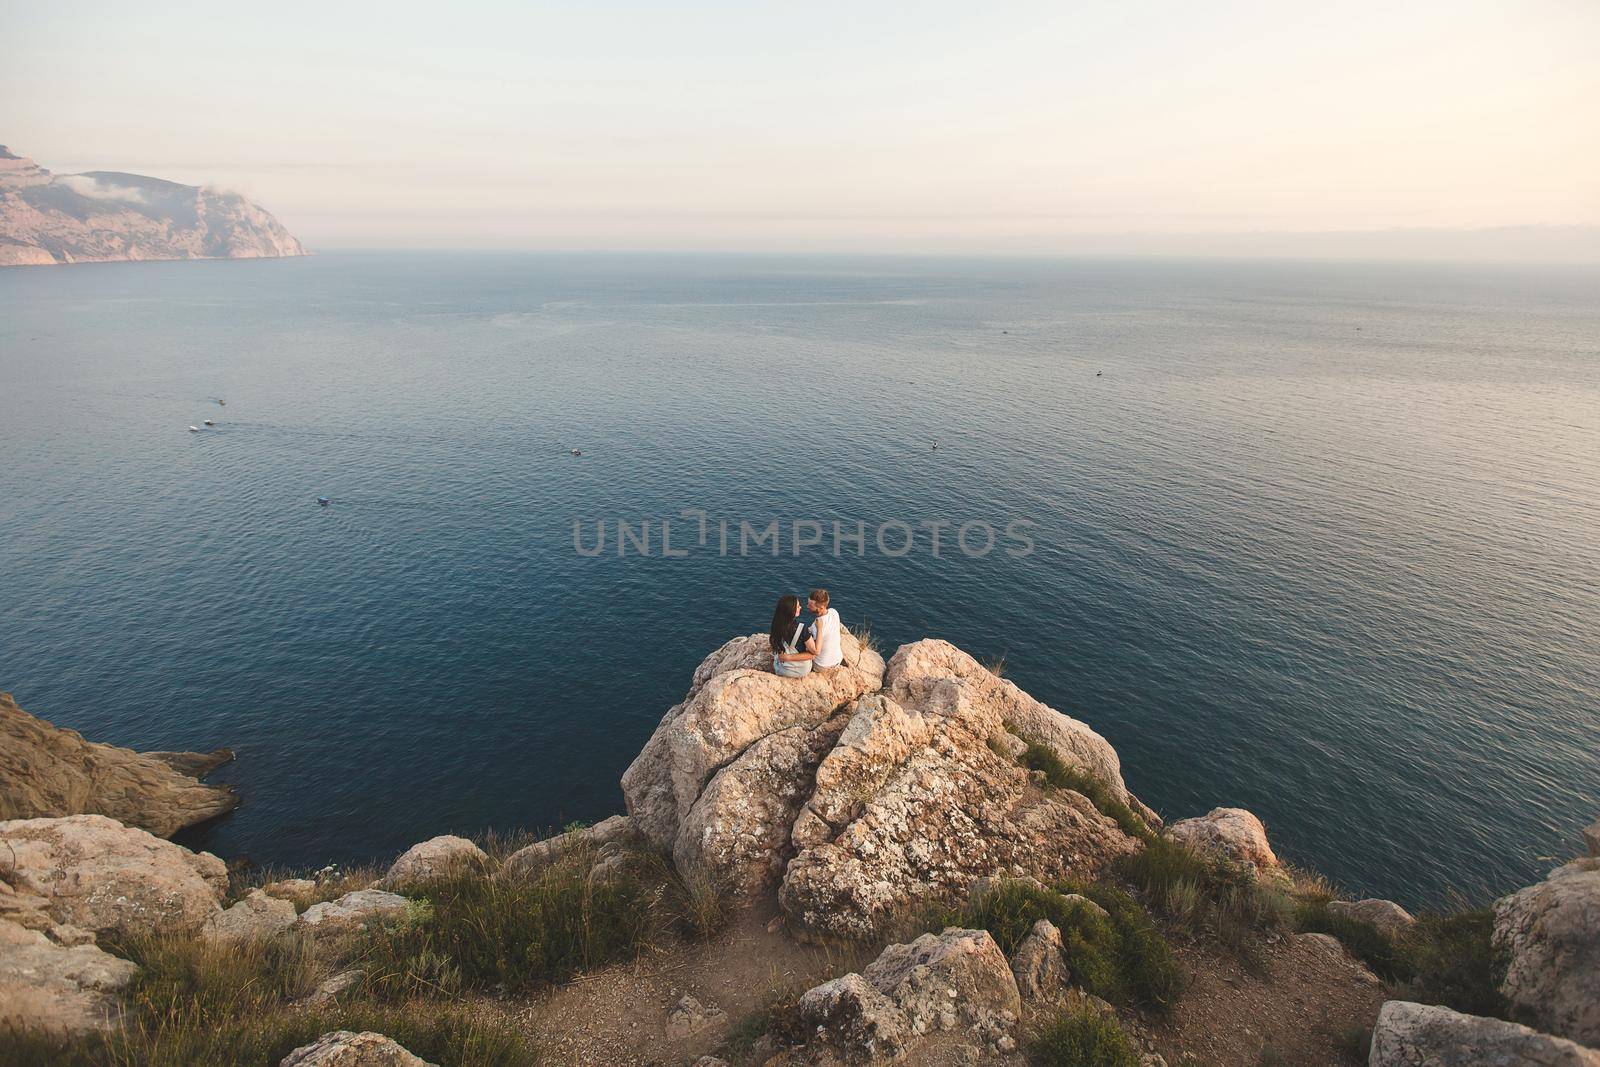 Lovers, guy and girl, on the edge of the cliff against the backdrop of mountains and ocean by StudioPeace